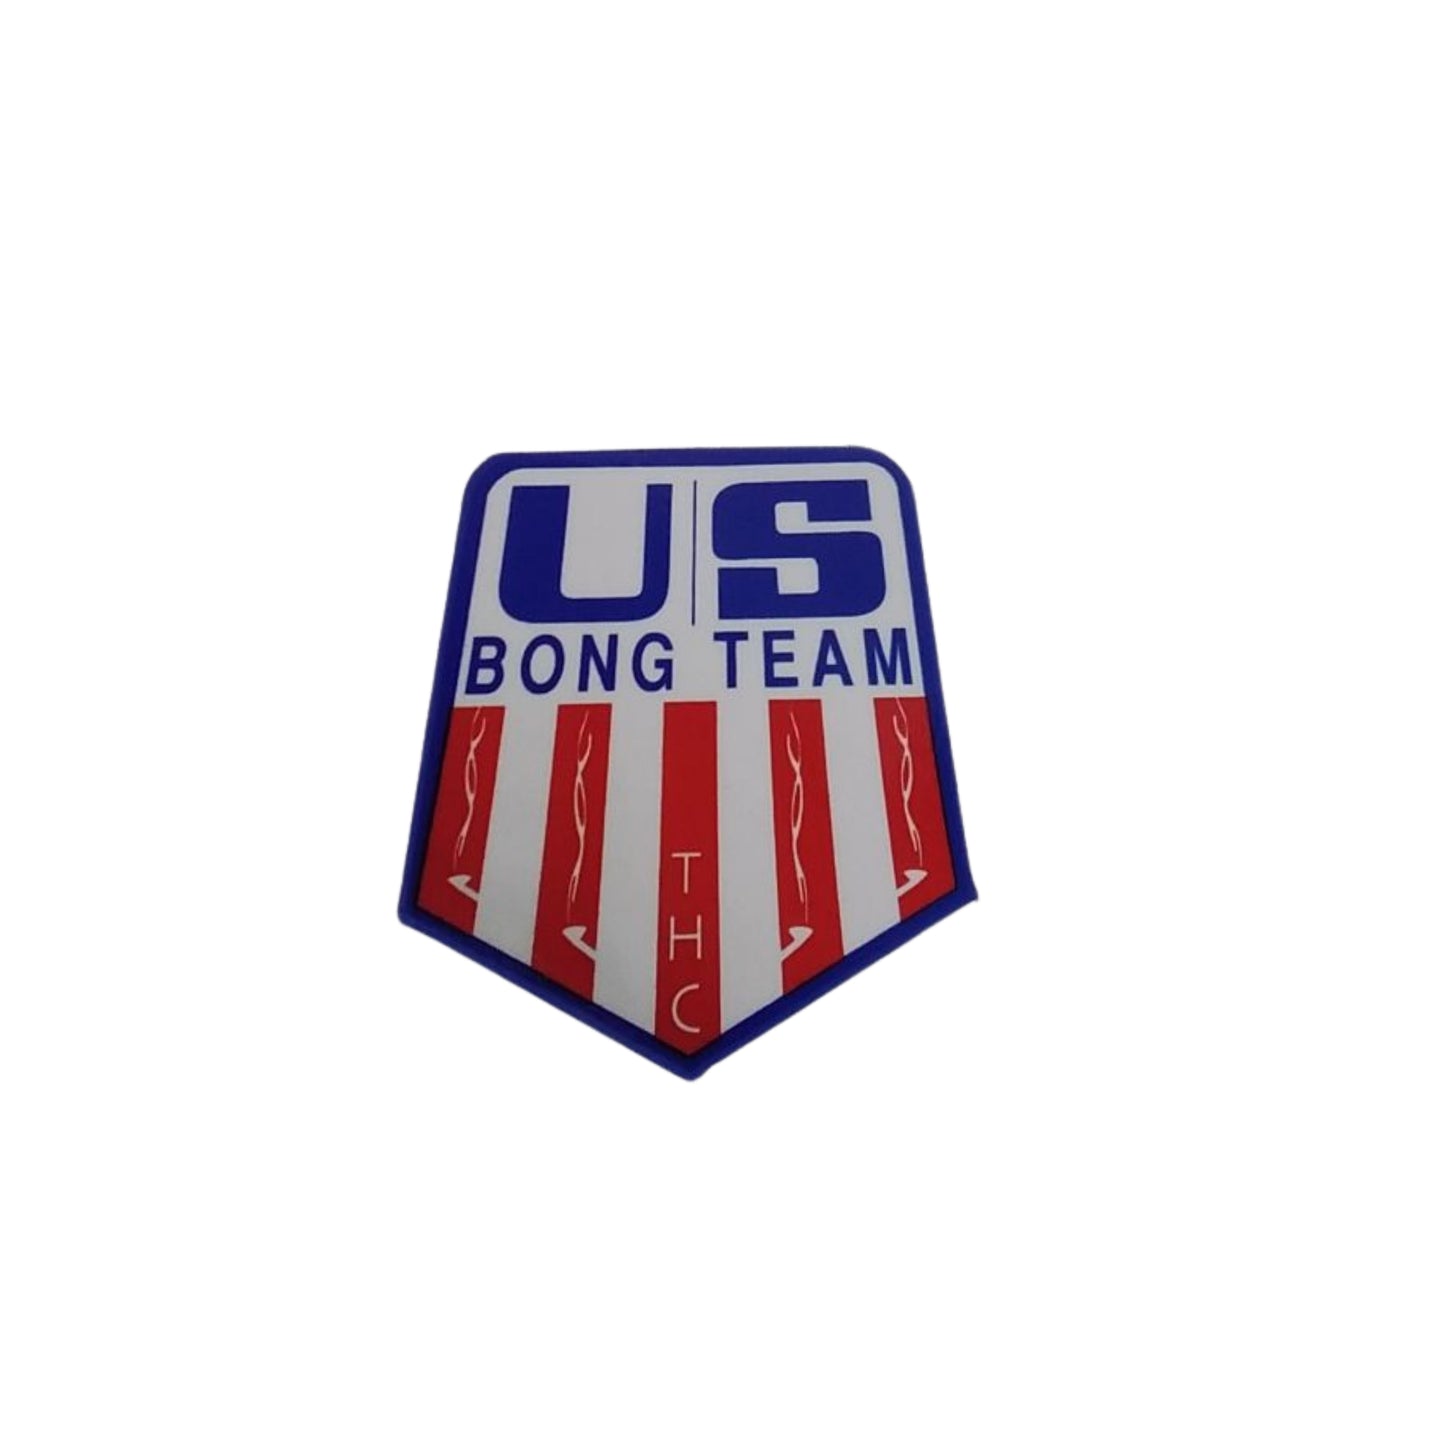 US Bong Team, Red White and Blue - Sticker